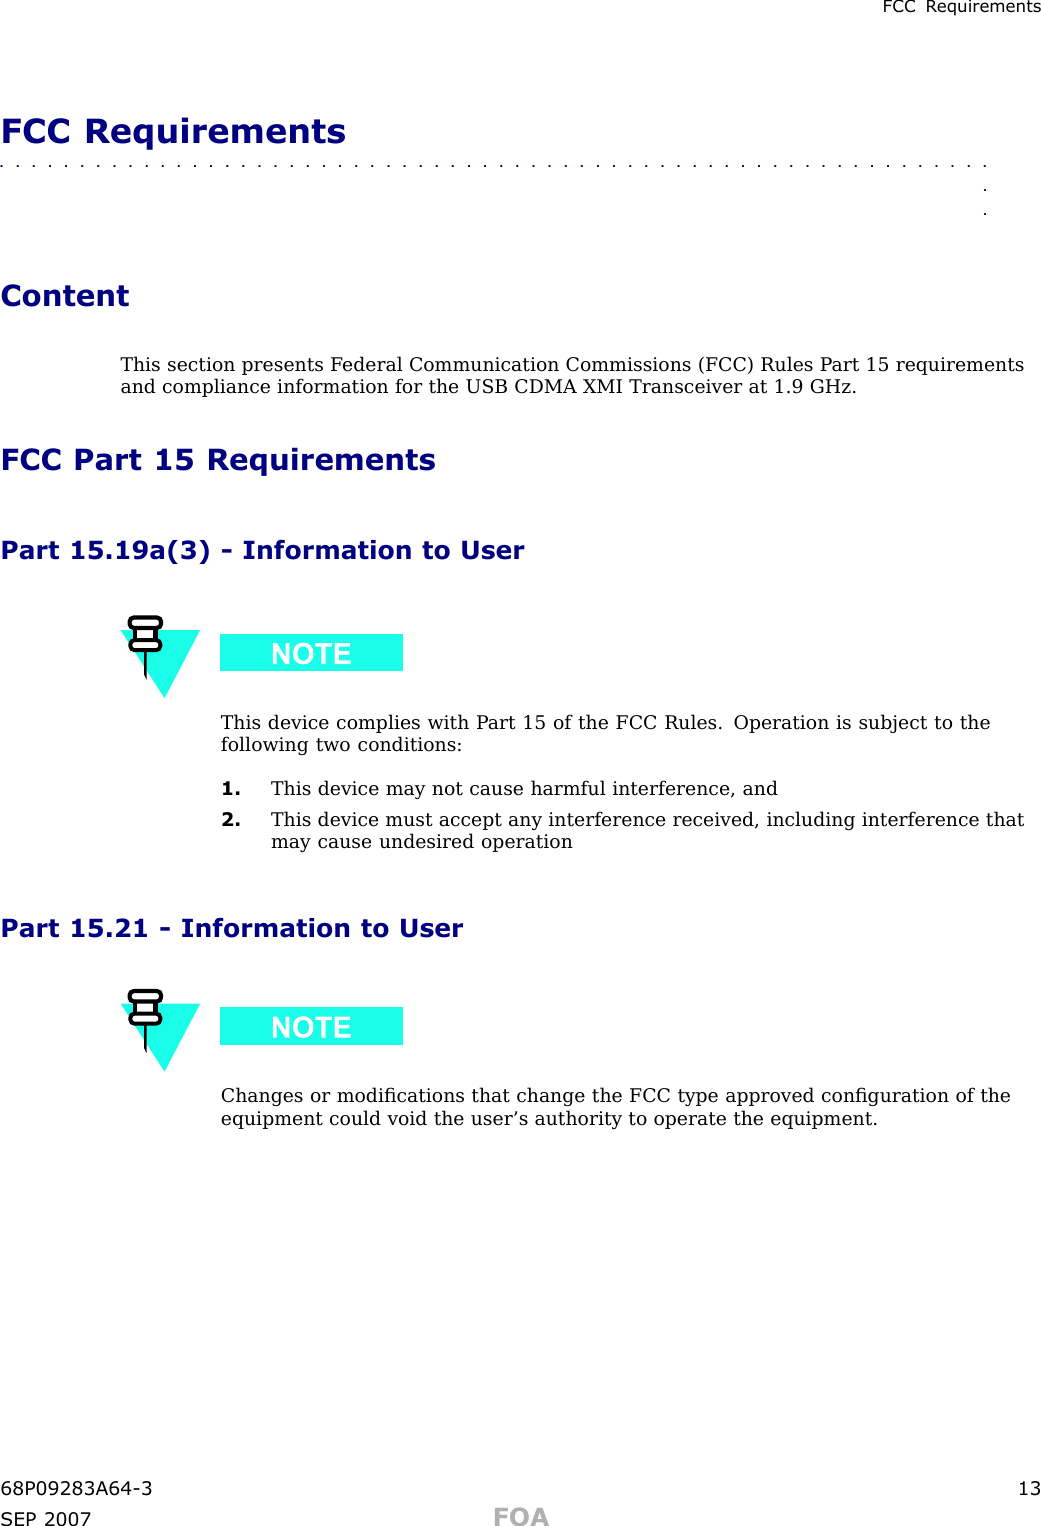 FCC R equirementsFCC Requirements■■■■■■■■■■■■■■■■■■■■■■■■■■■■■■■■■■■■■■■■■■■■■■■■■■■■■■■■■■■■■■■■ContentThis section presents F ederal Communication Commissions (FCC) Rules P art 15 requirementsand compliance information for the USB CDMA XMI Transceiver at 1.9 GHz.FCC Part 15 RequirementsPart 15.19a(3) - Information to UserThis device complies with P art 15 of the FCC Rules. Operation is subject to thefollowing two conditions:1. This device may not cause harmful interference, and2. This device must accept any interference received, including interference thatmay cause undesired operationPart 15.21 - Information to UserChanges or modiﬁcations that change the FCC type approved conﬁguration of theequipment could void the user’s authority to operate the equipment.68P09283A64 -3 13SEP 2007 FOA